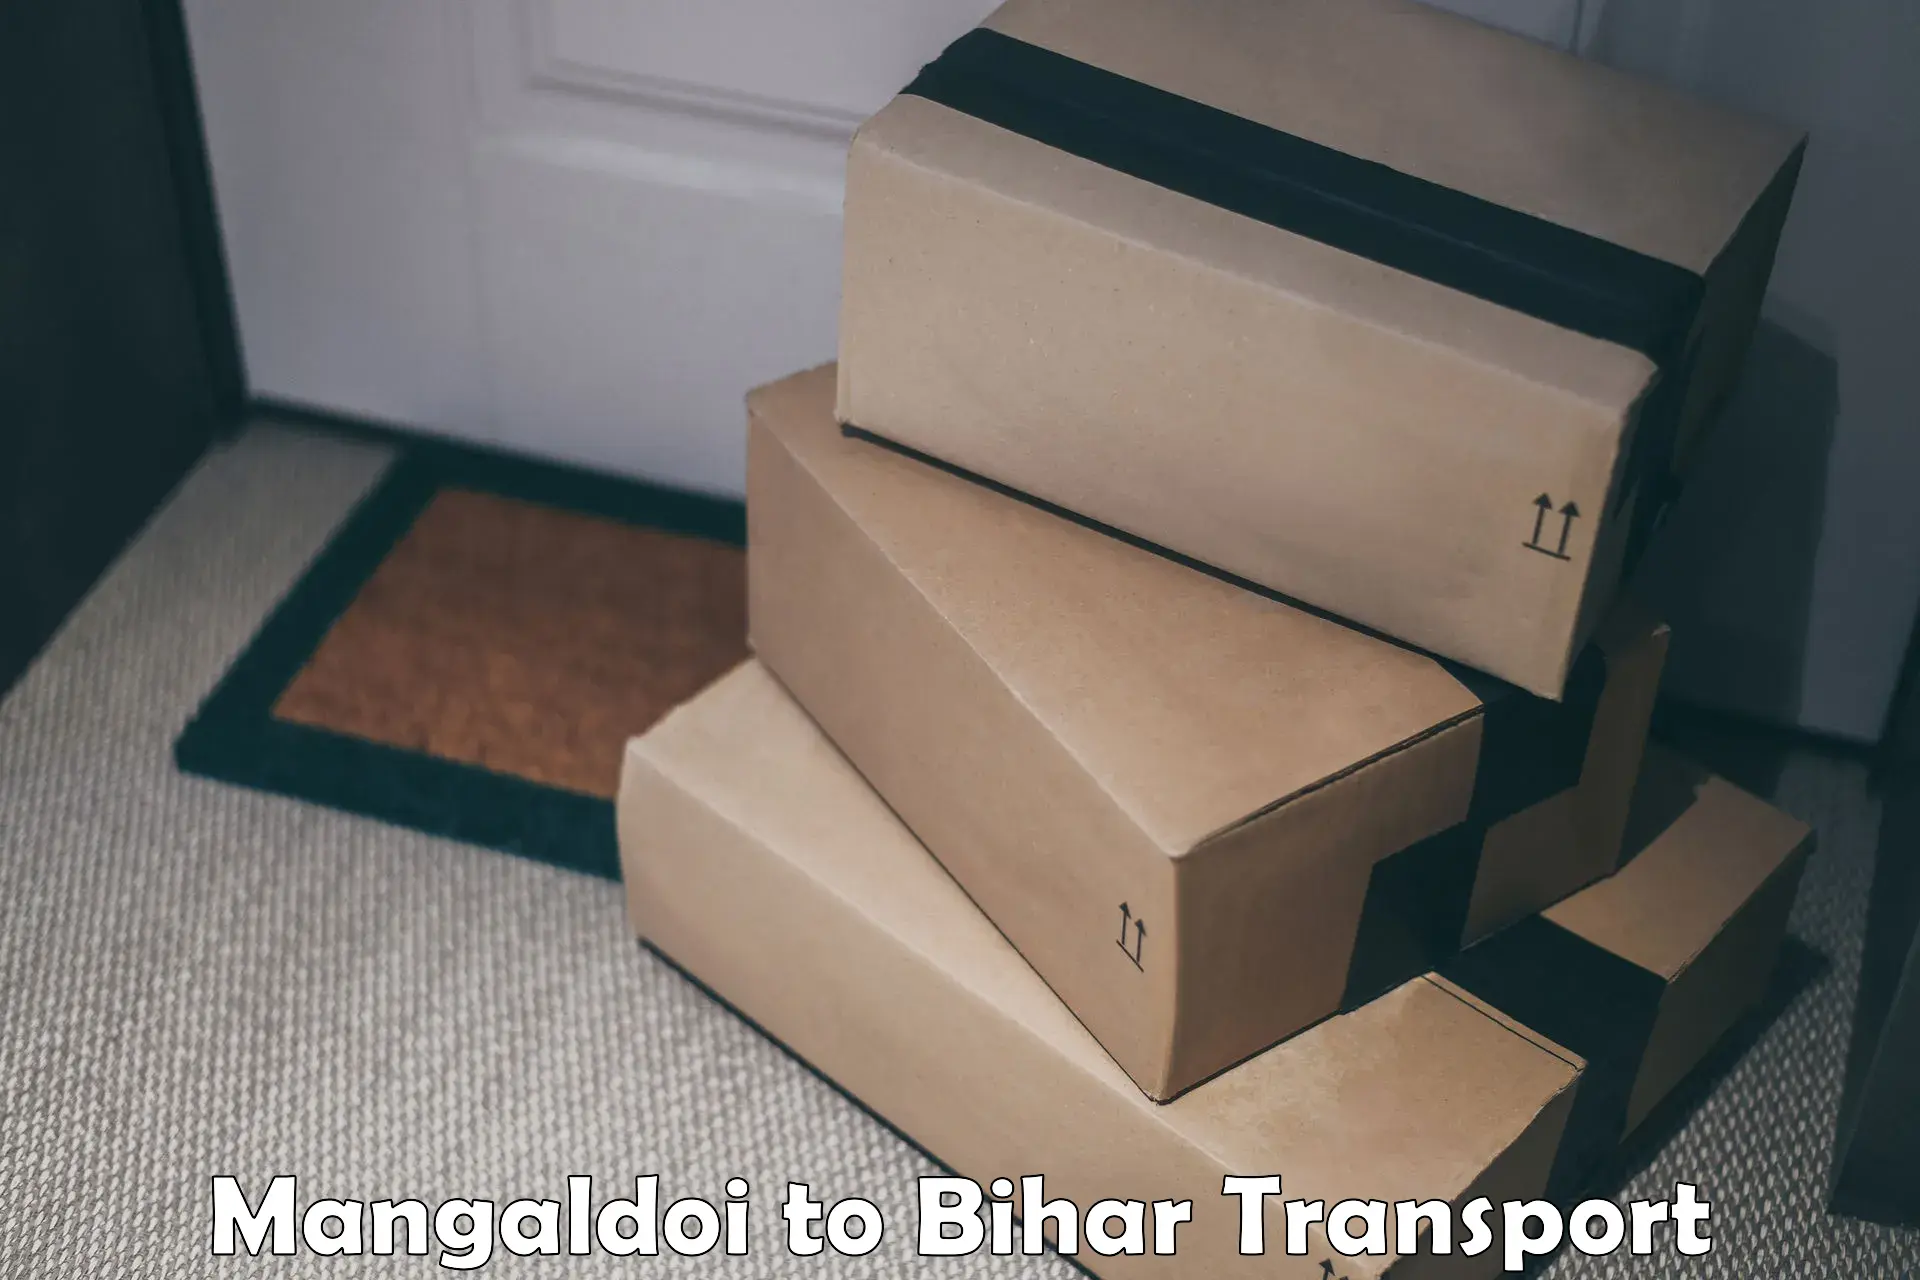 Part load transport service in India Mangaldoi to Rohtas